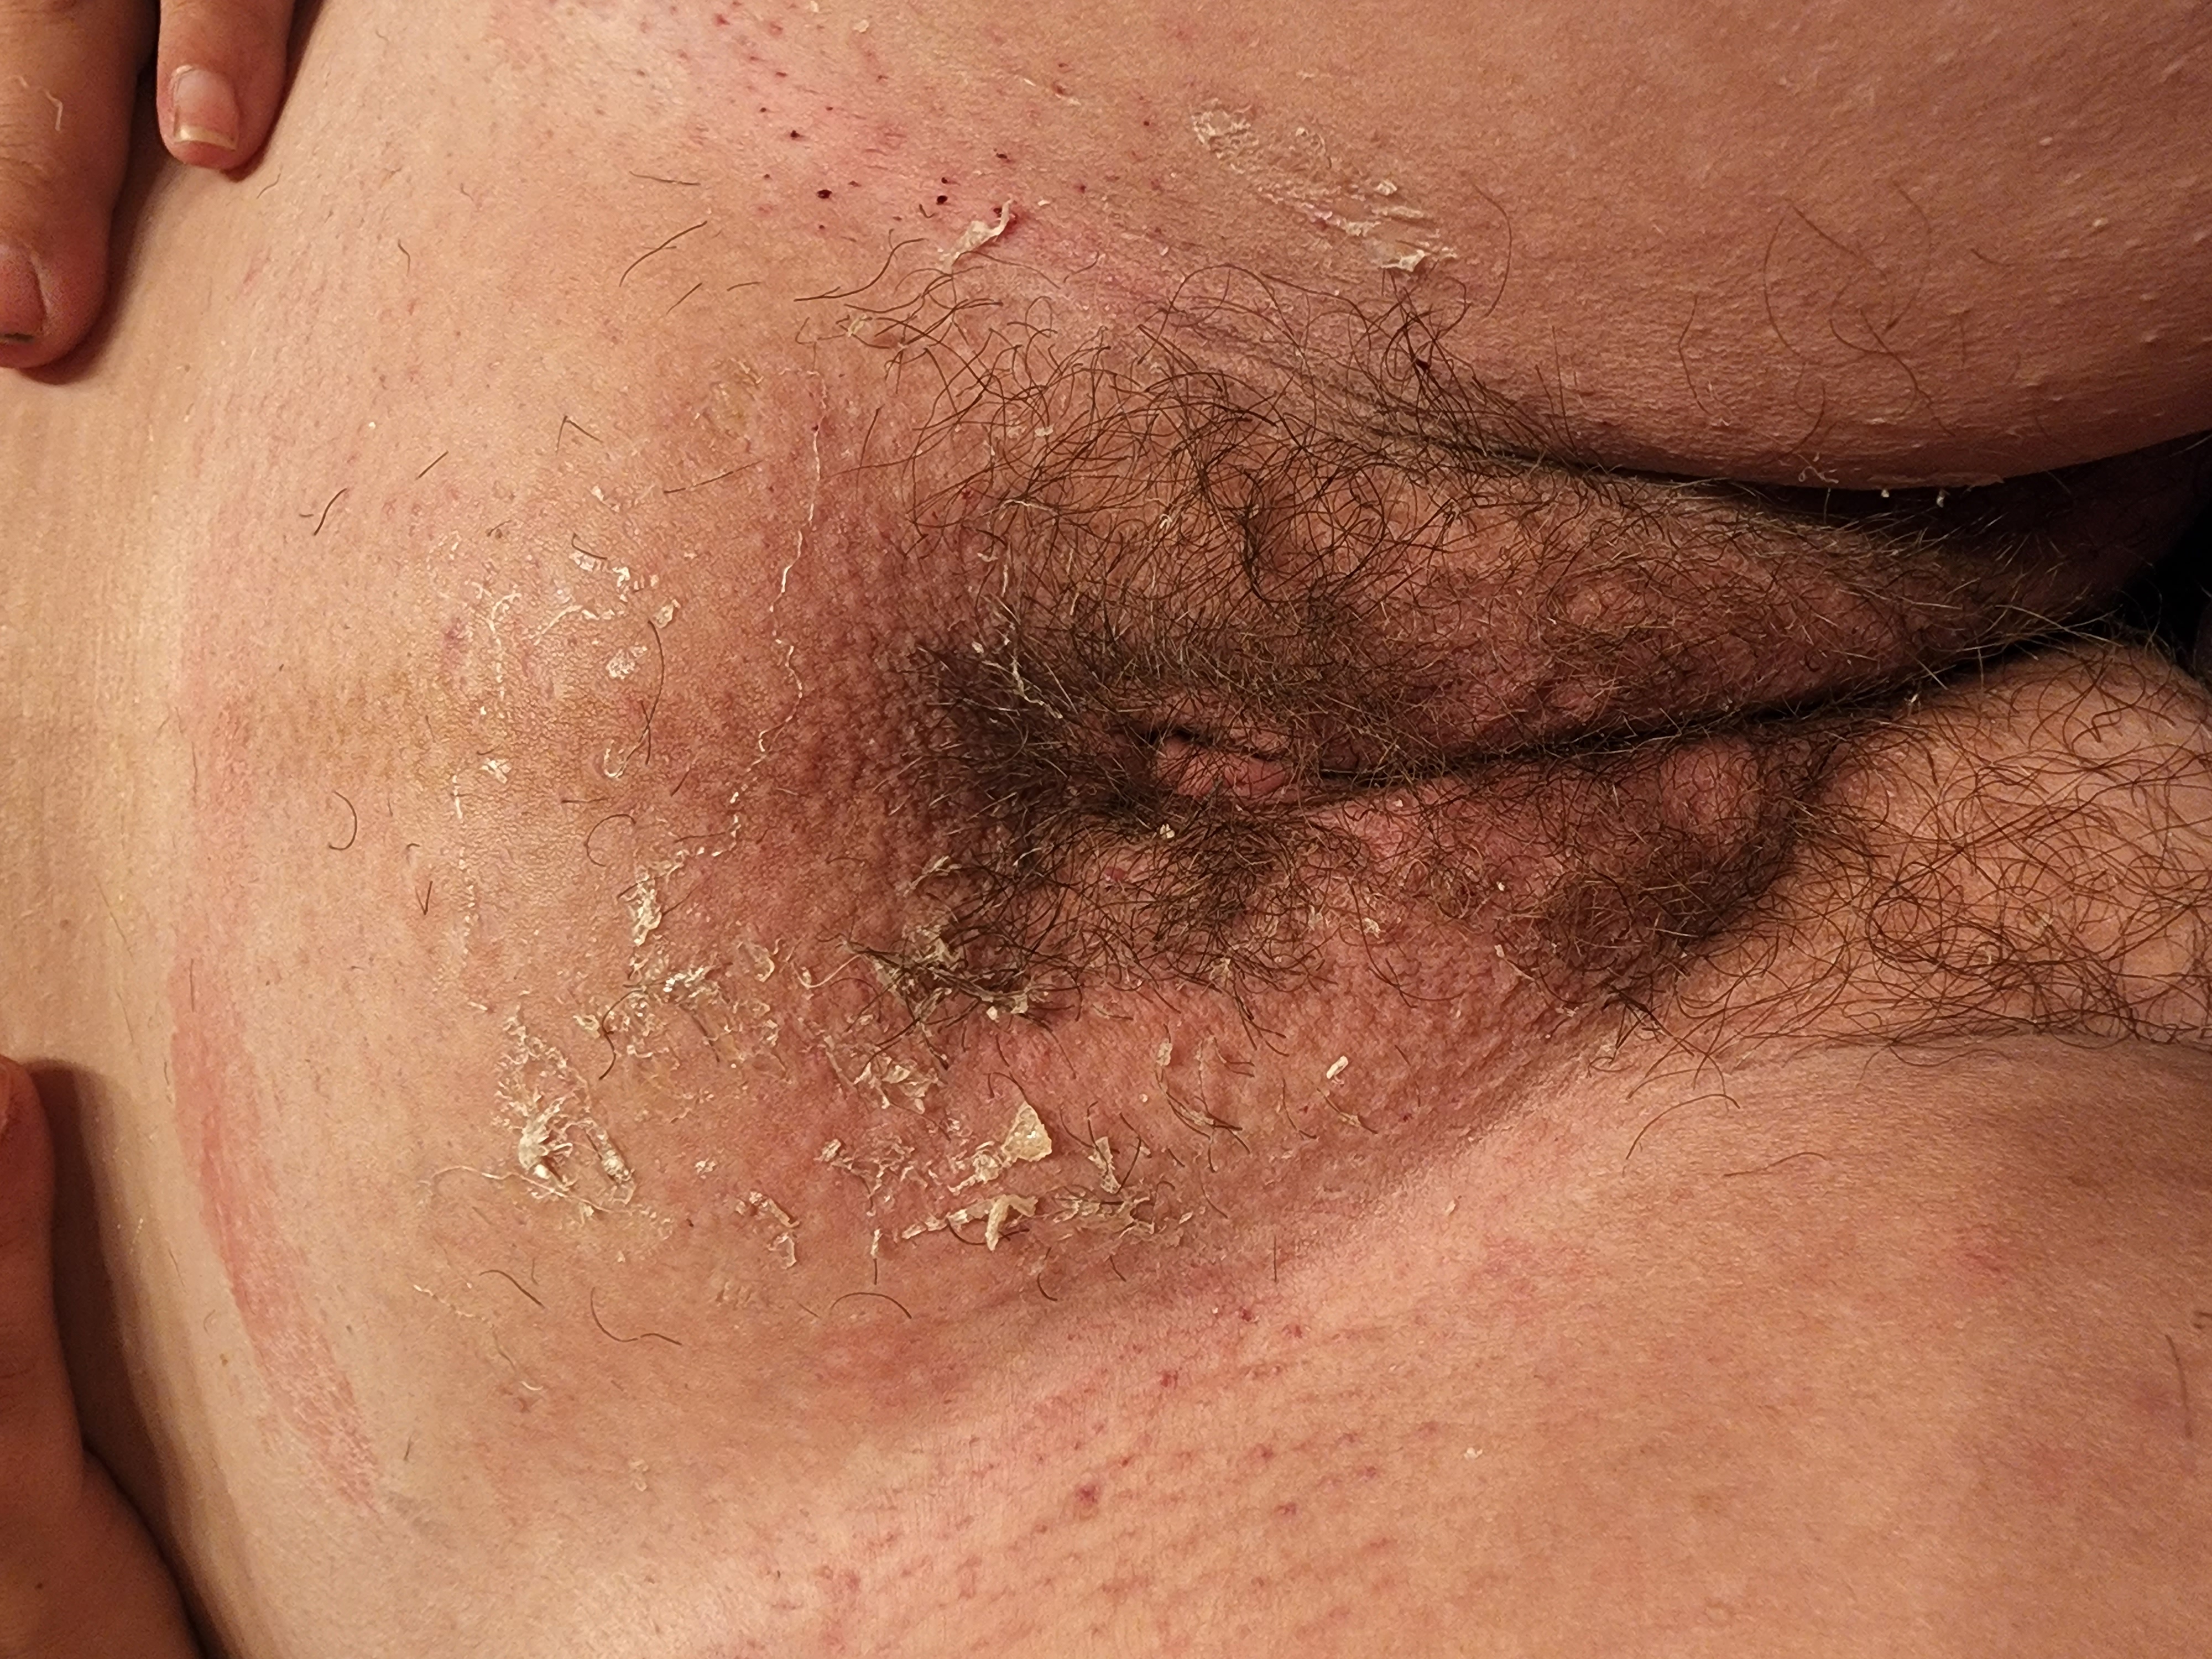 This is my wifes pussy and tits